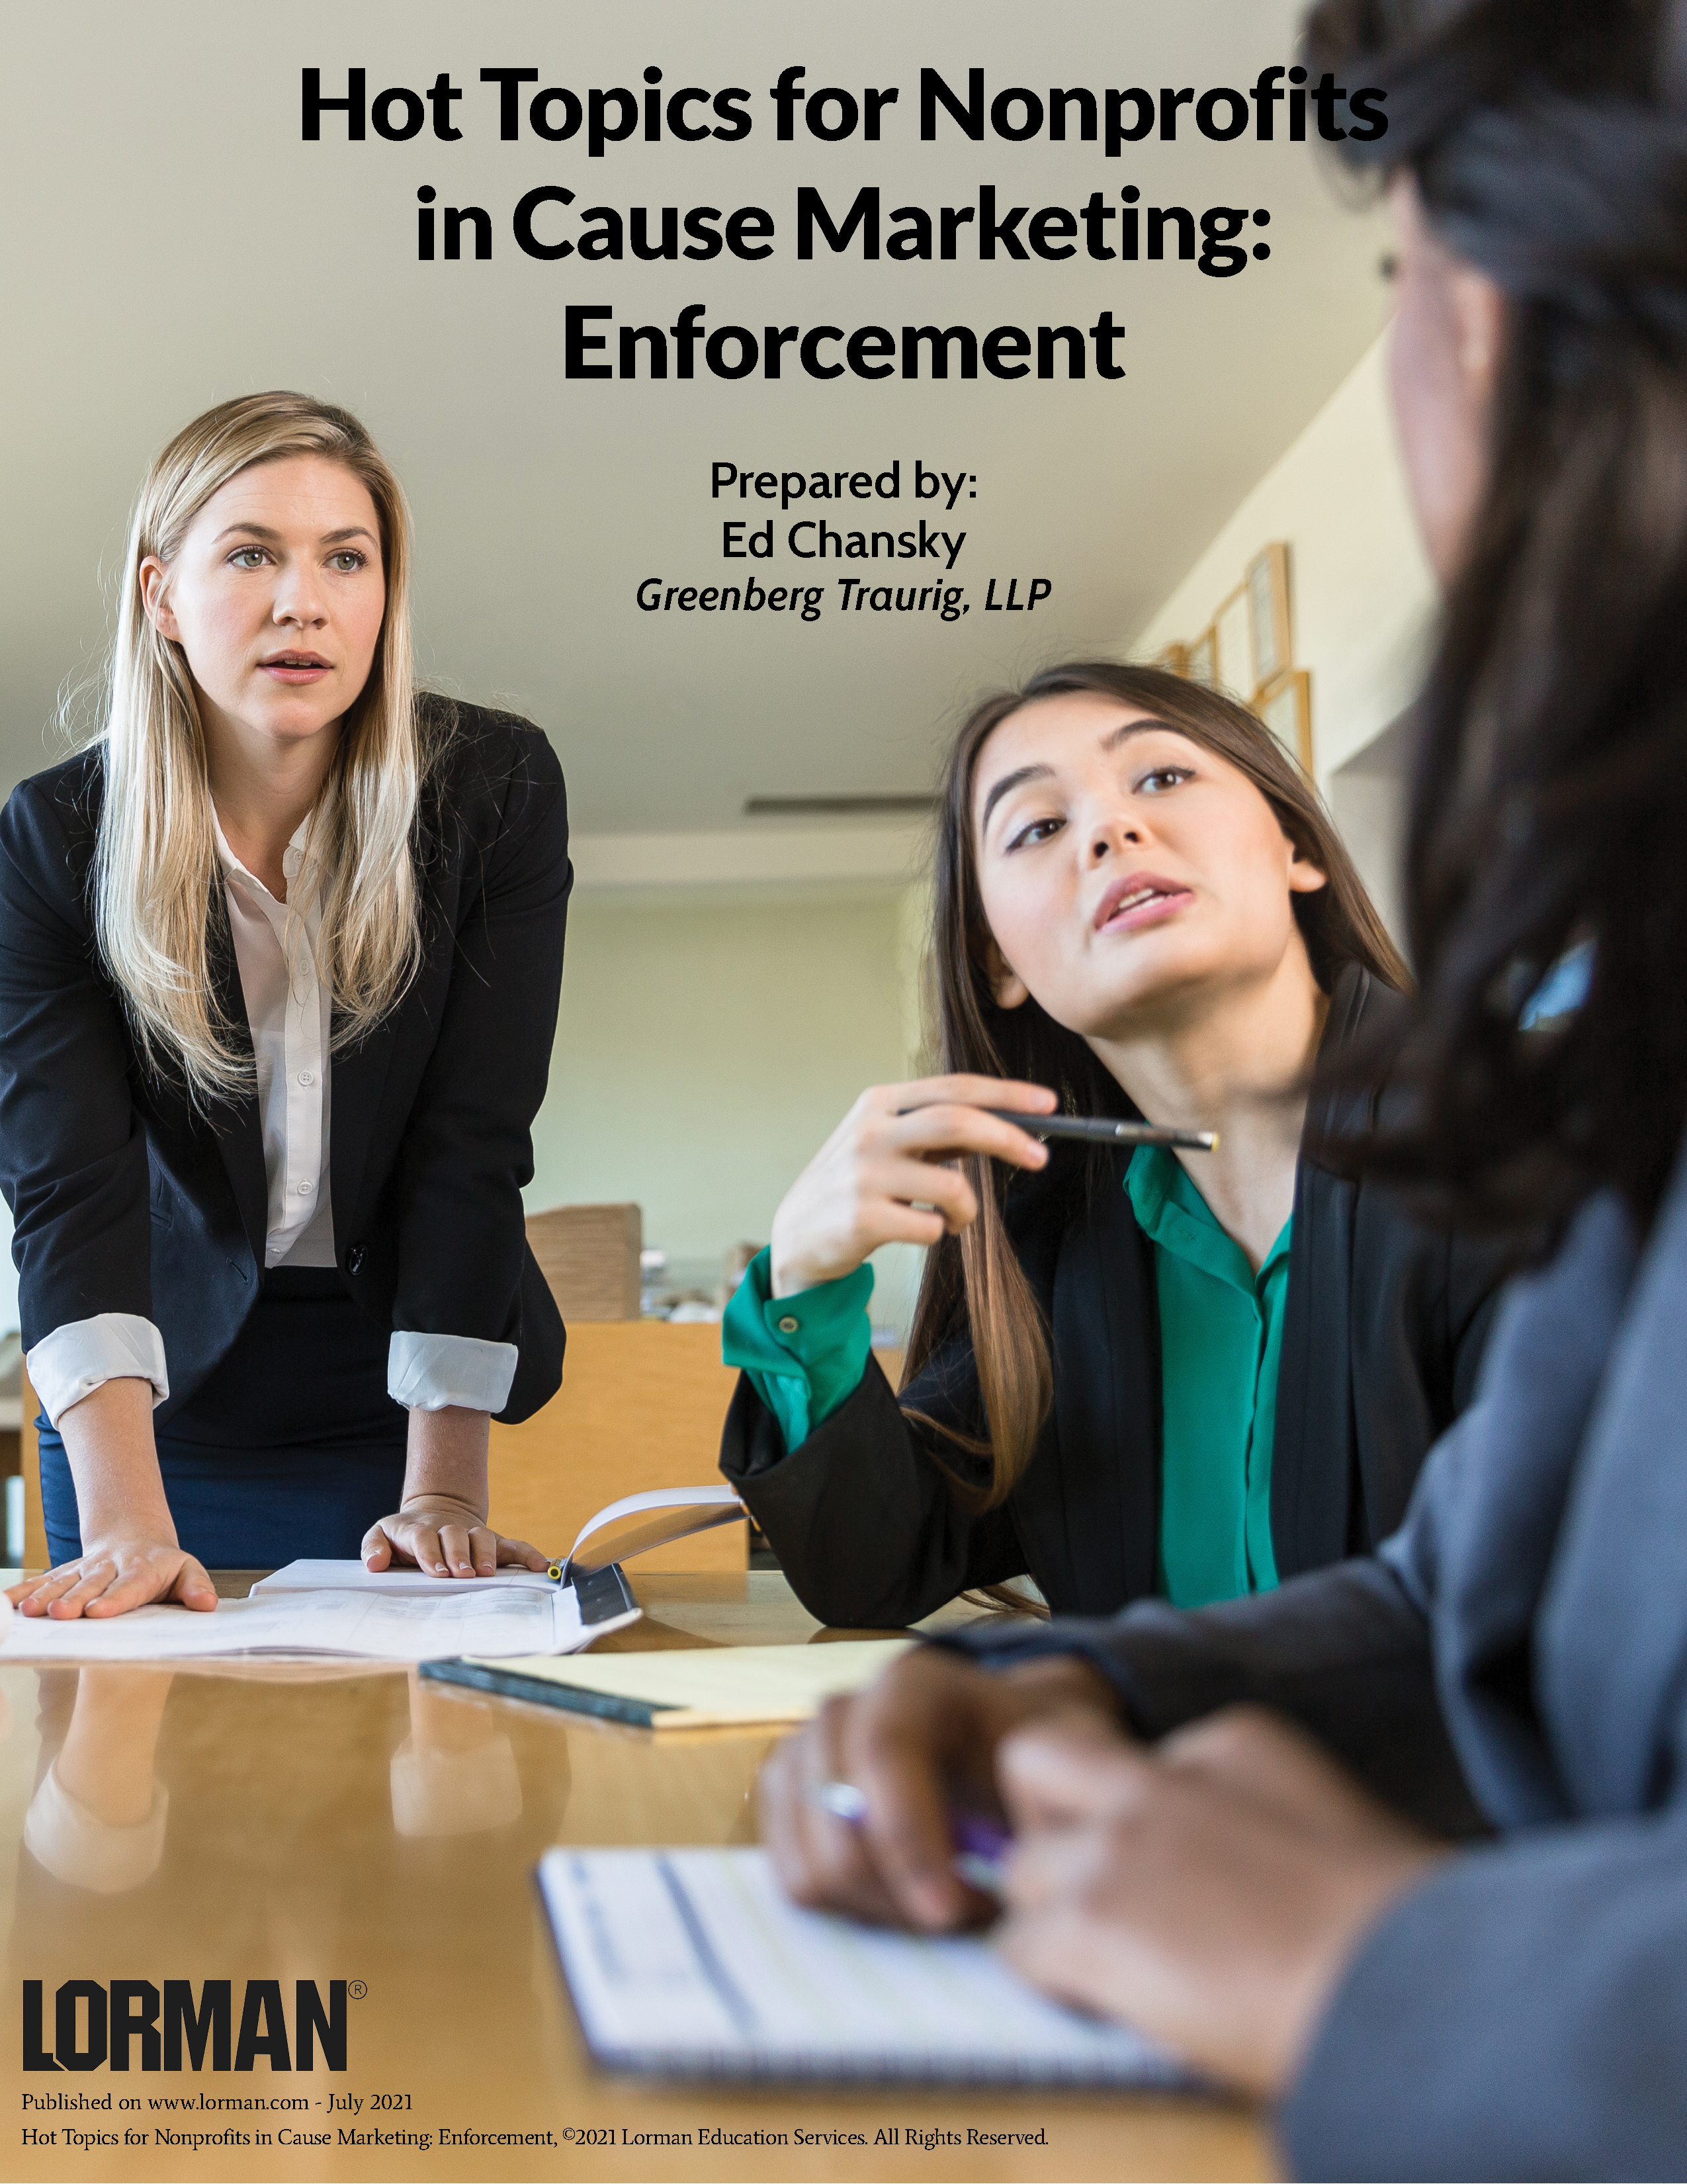 Hot Topics for Nonprofits in Cause Marketing: Enforcement